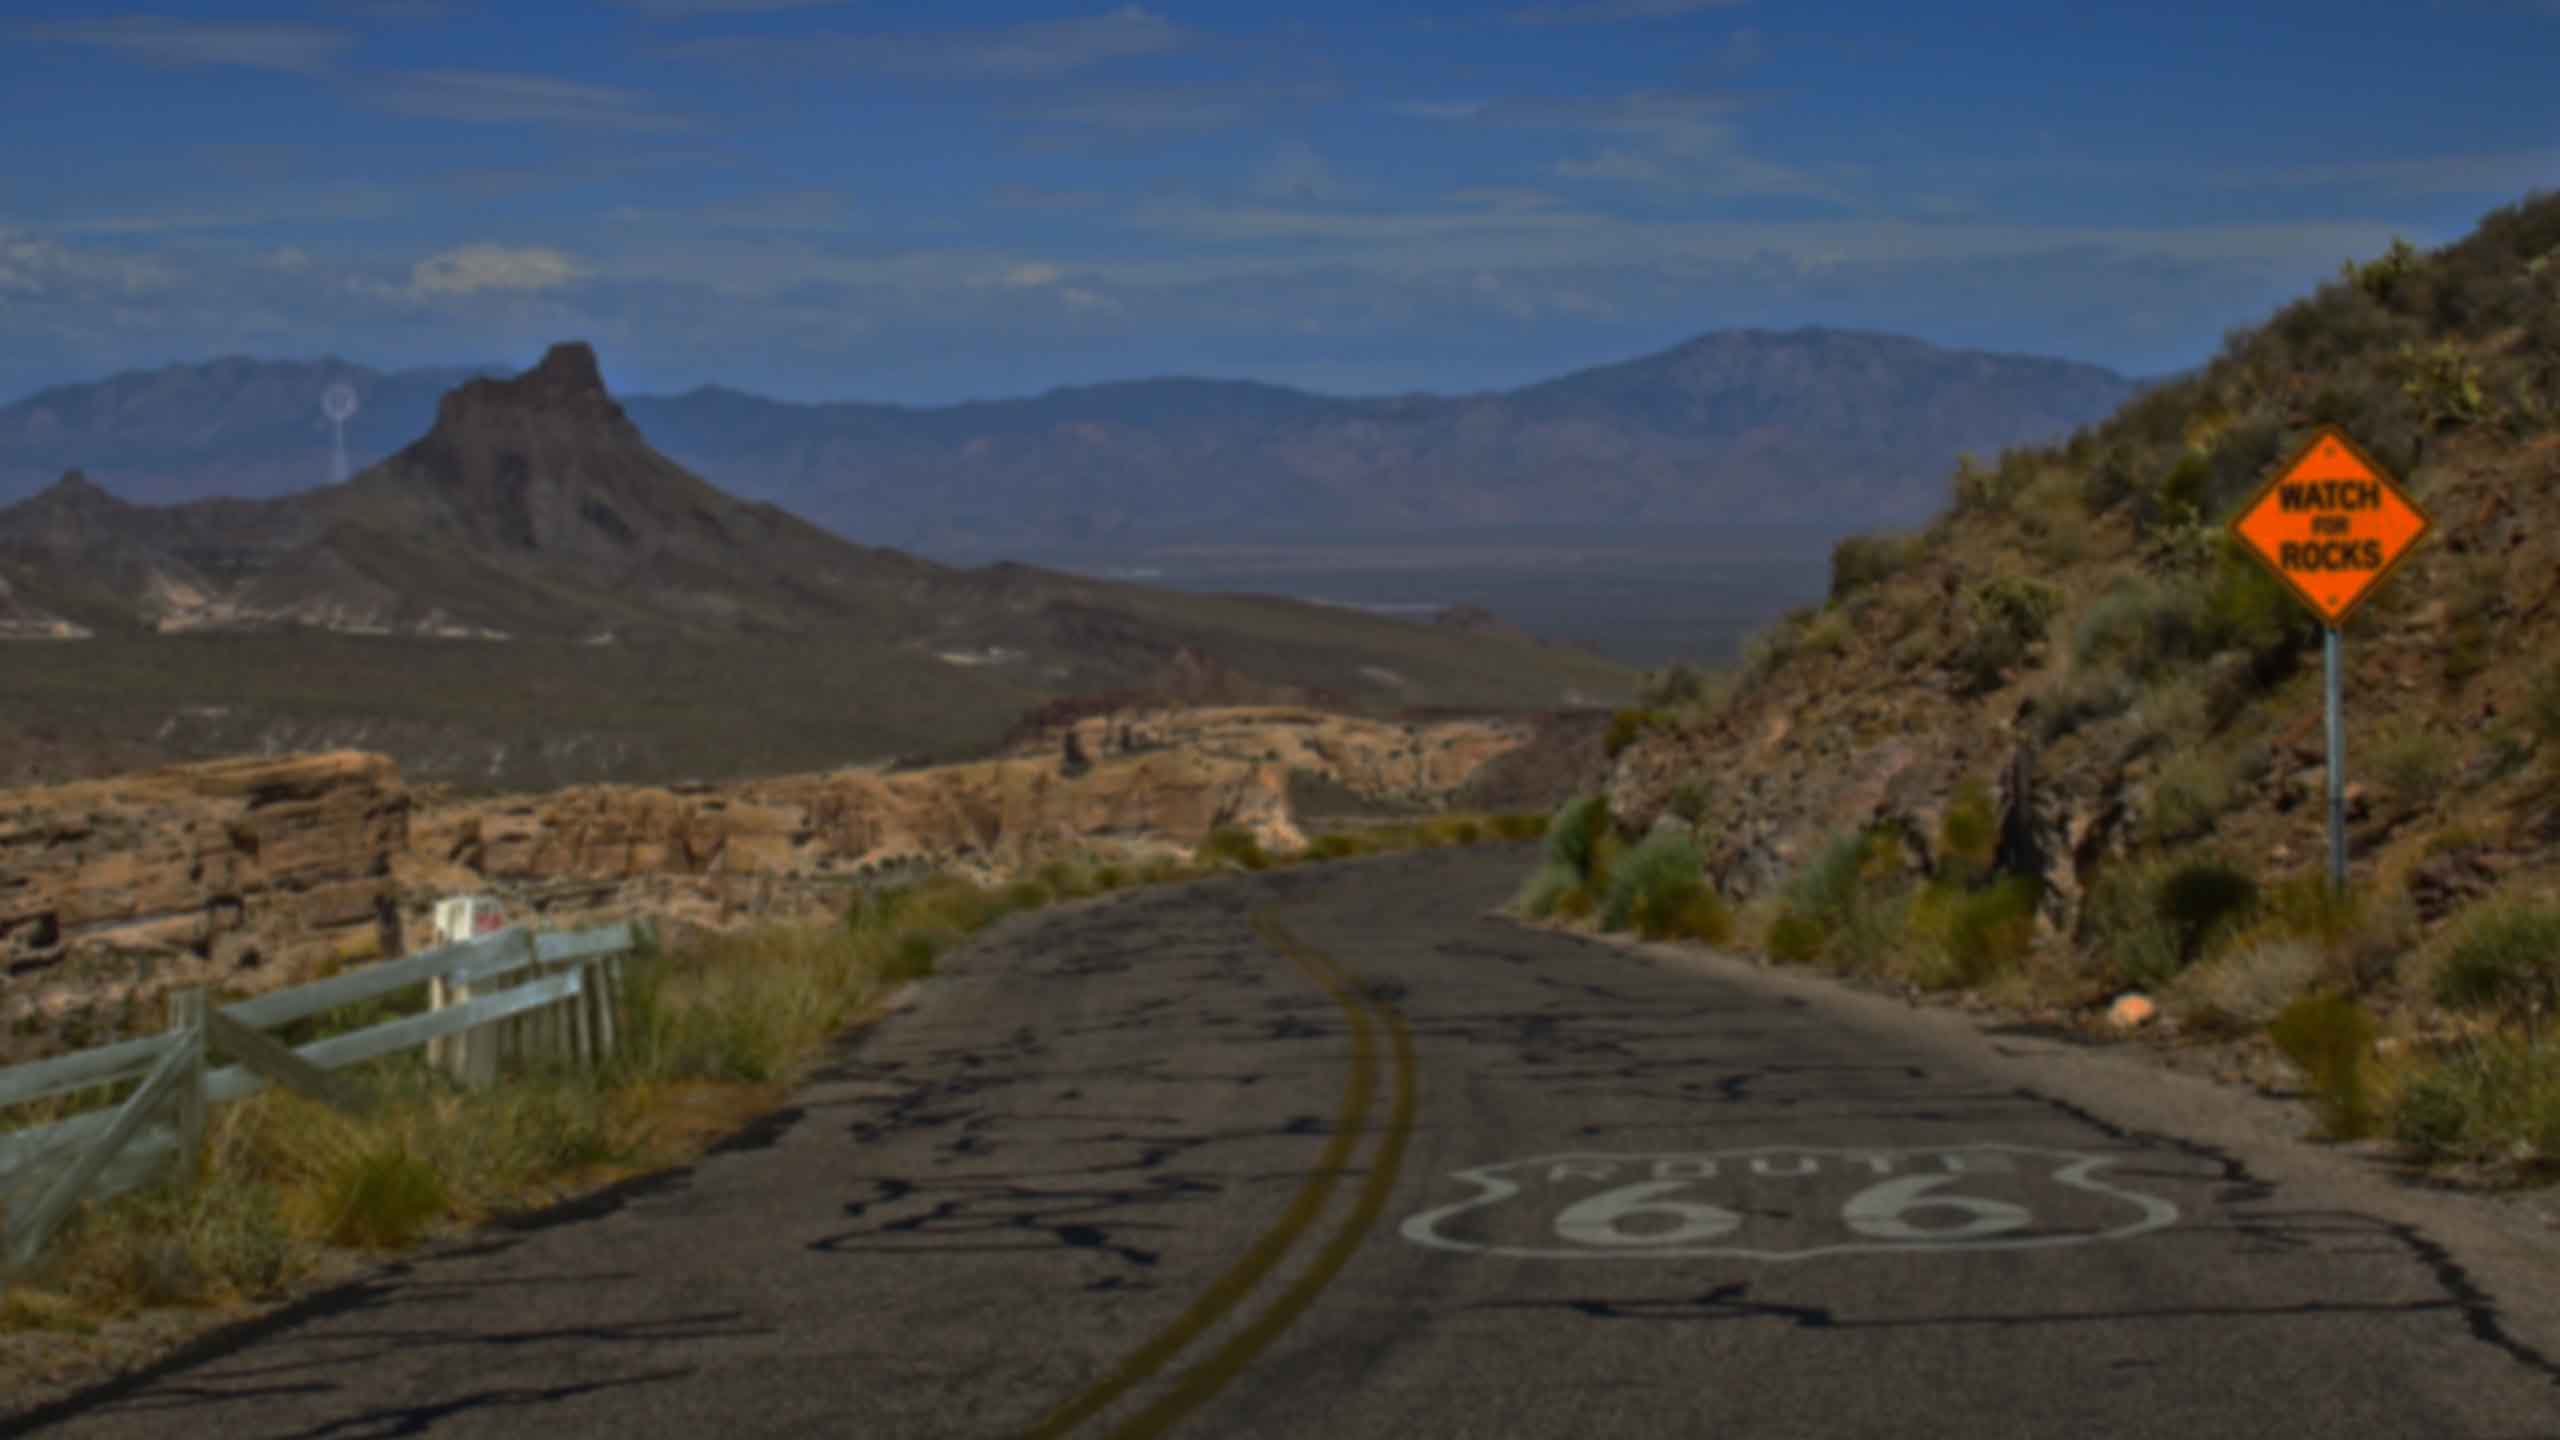 New Mexico film, 'Lost in New Mexico' by filmmaker Jason Rosette